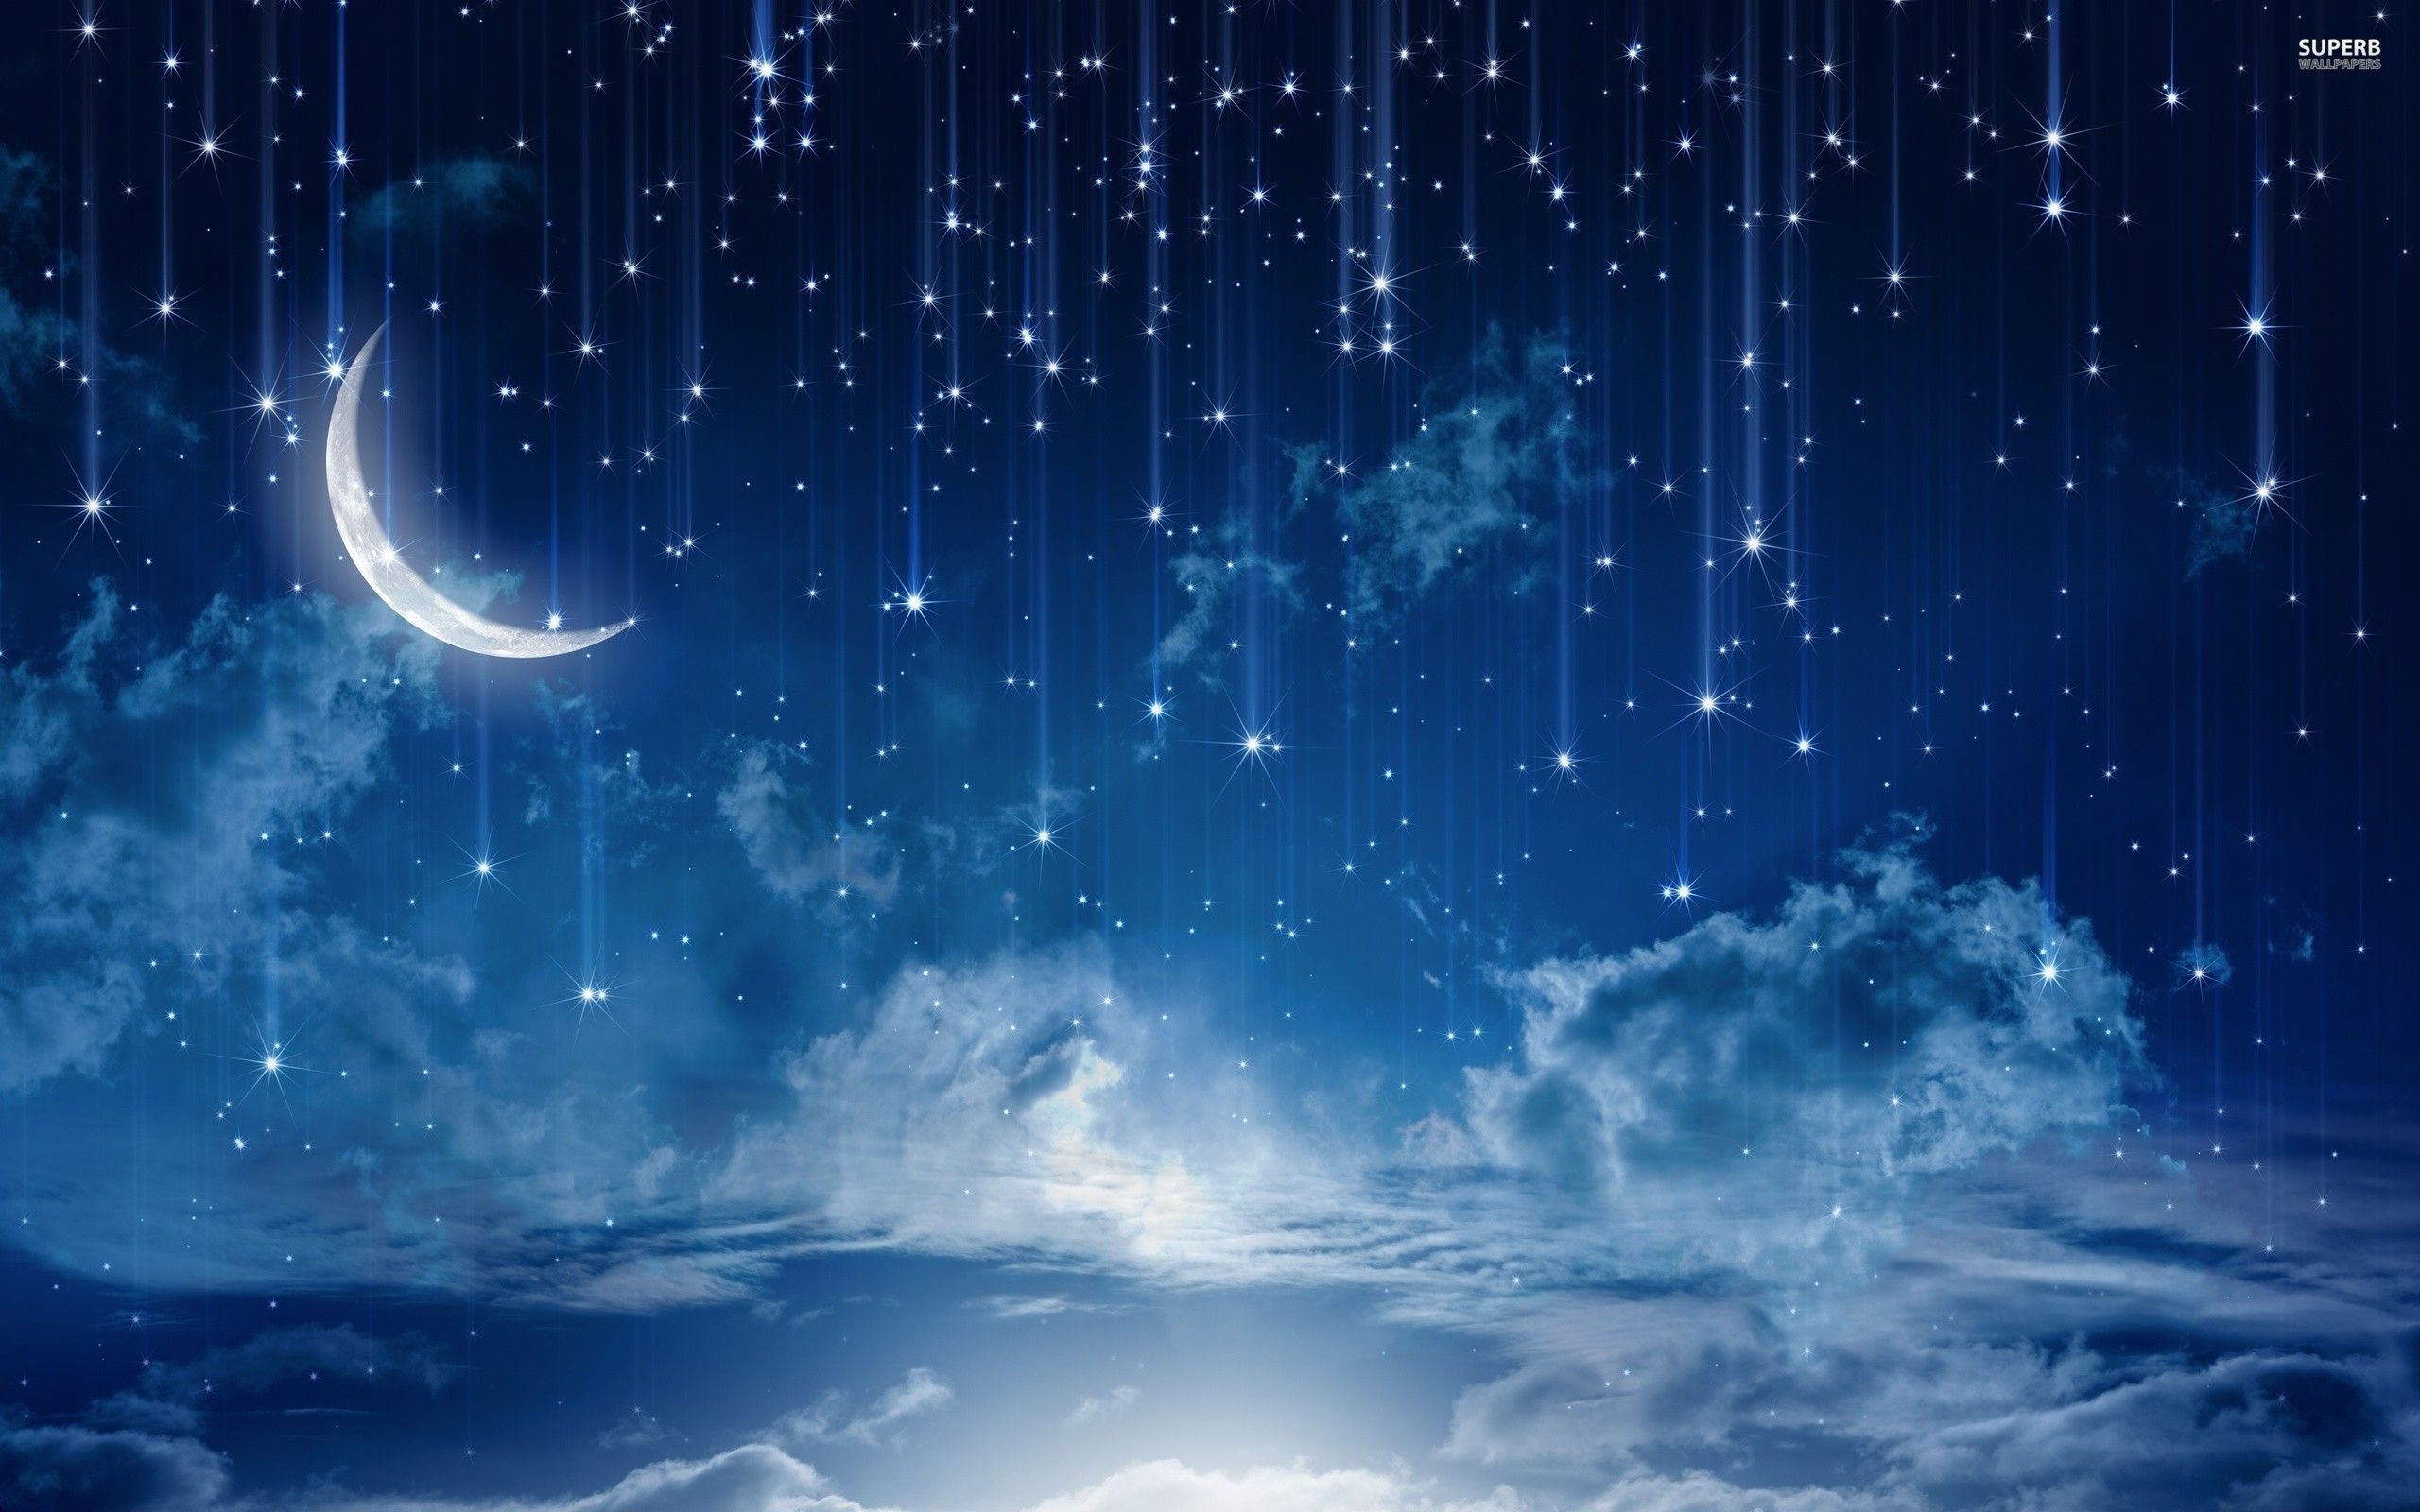 Feed Pictures – The Beautiful Night Sky Hd Widescreen Wallpaper Landscape Wallpaper Pictures